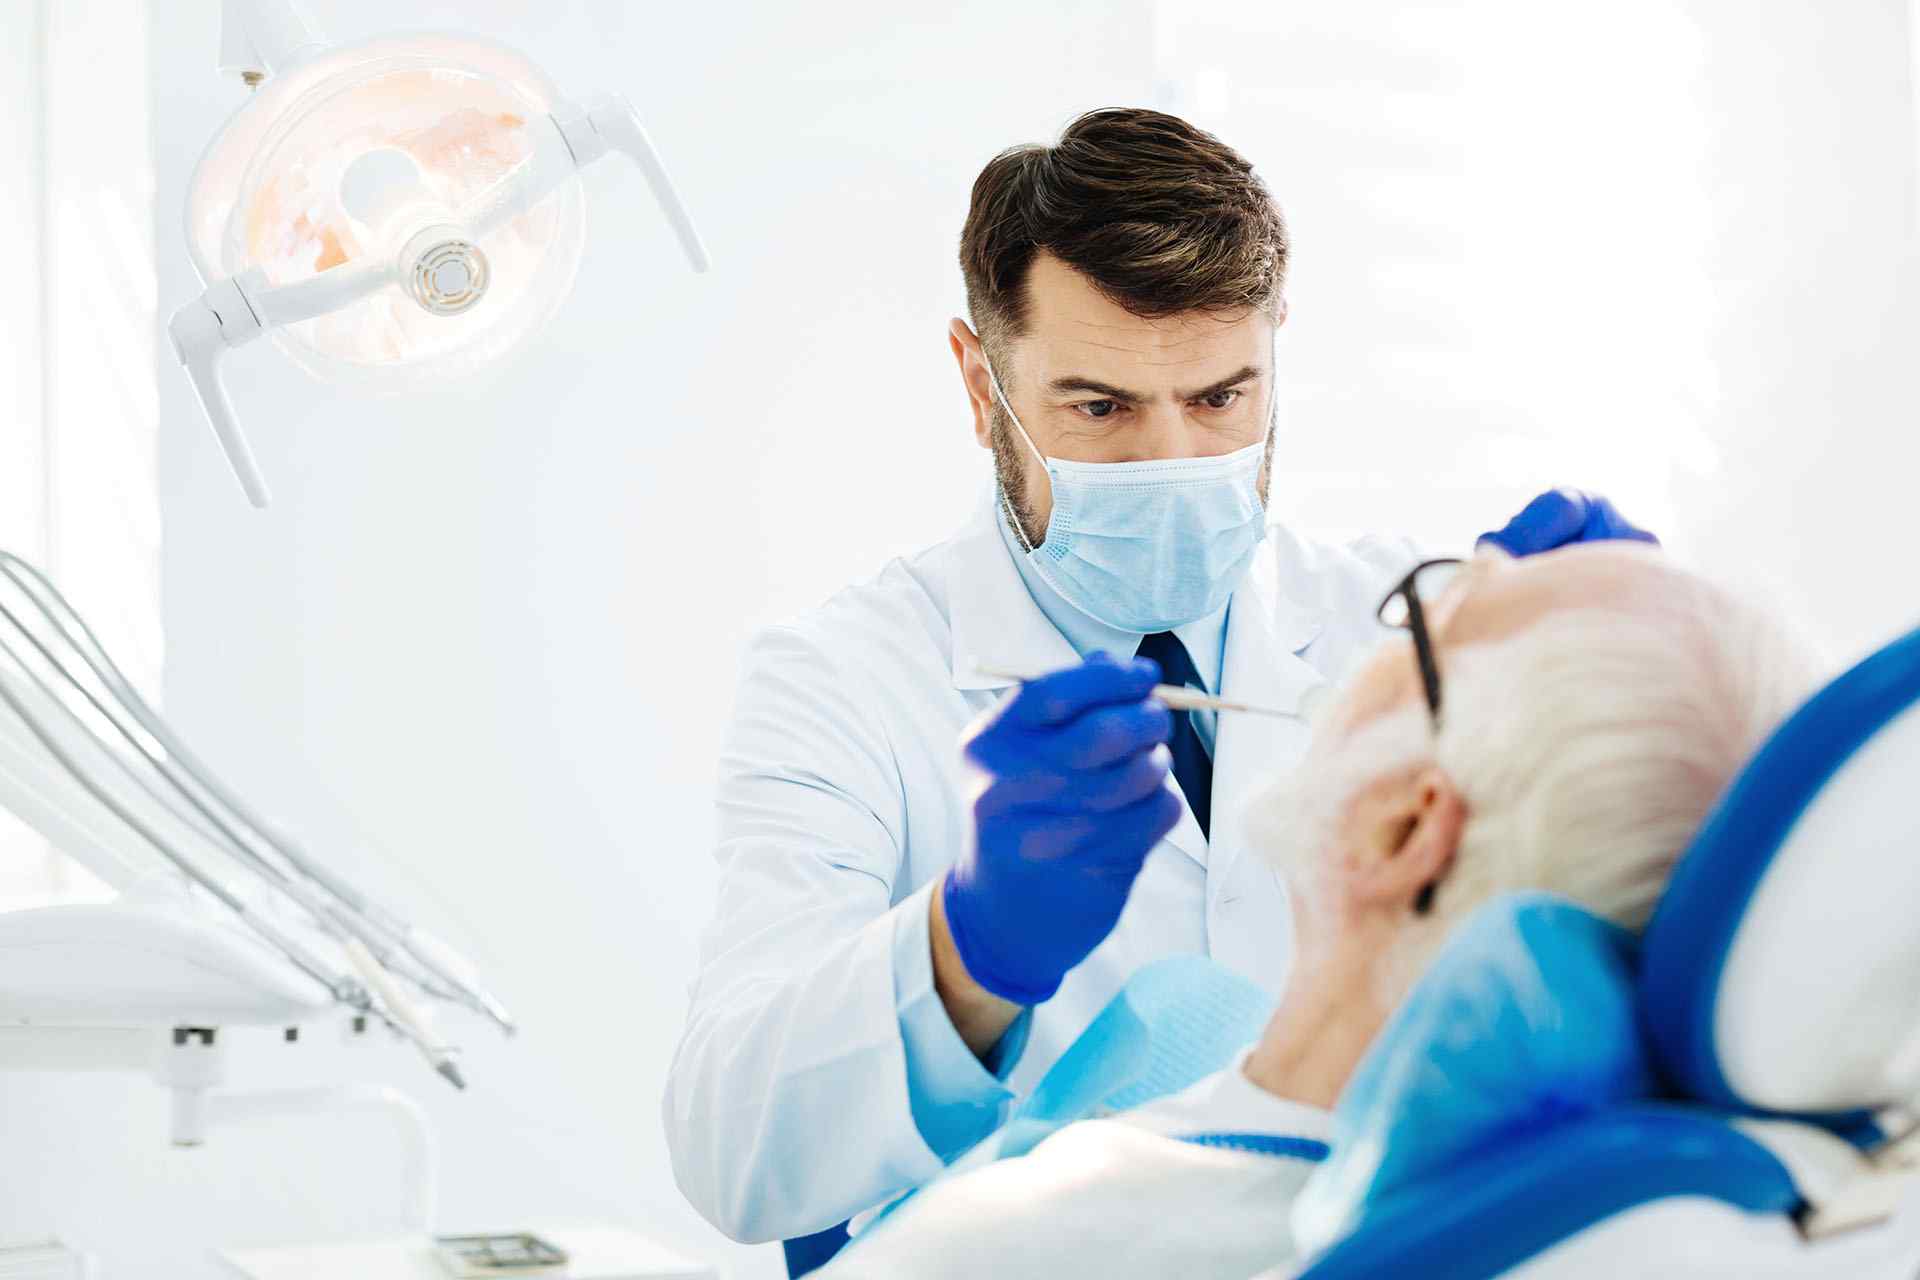 A dentist is examining the patient teeth during treatment